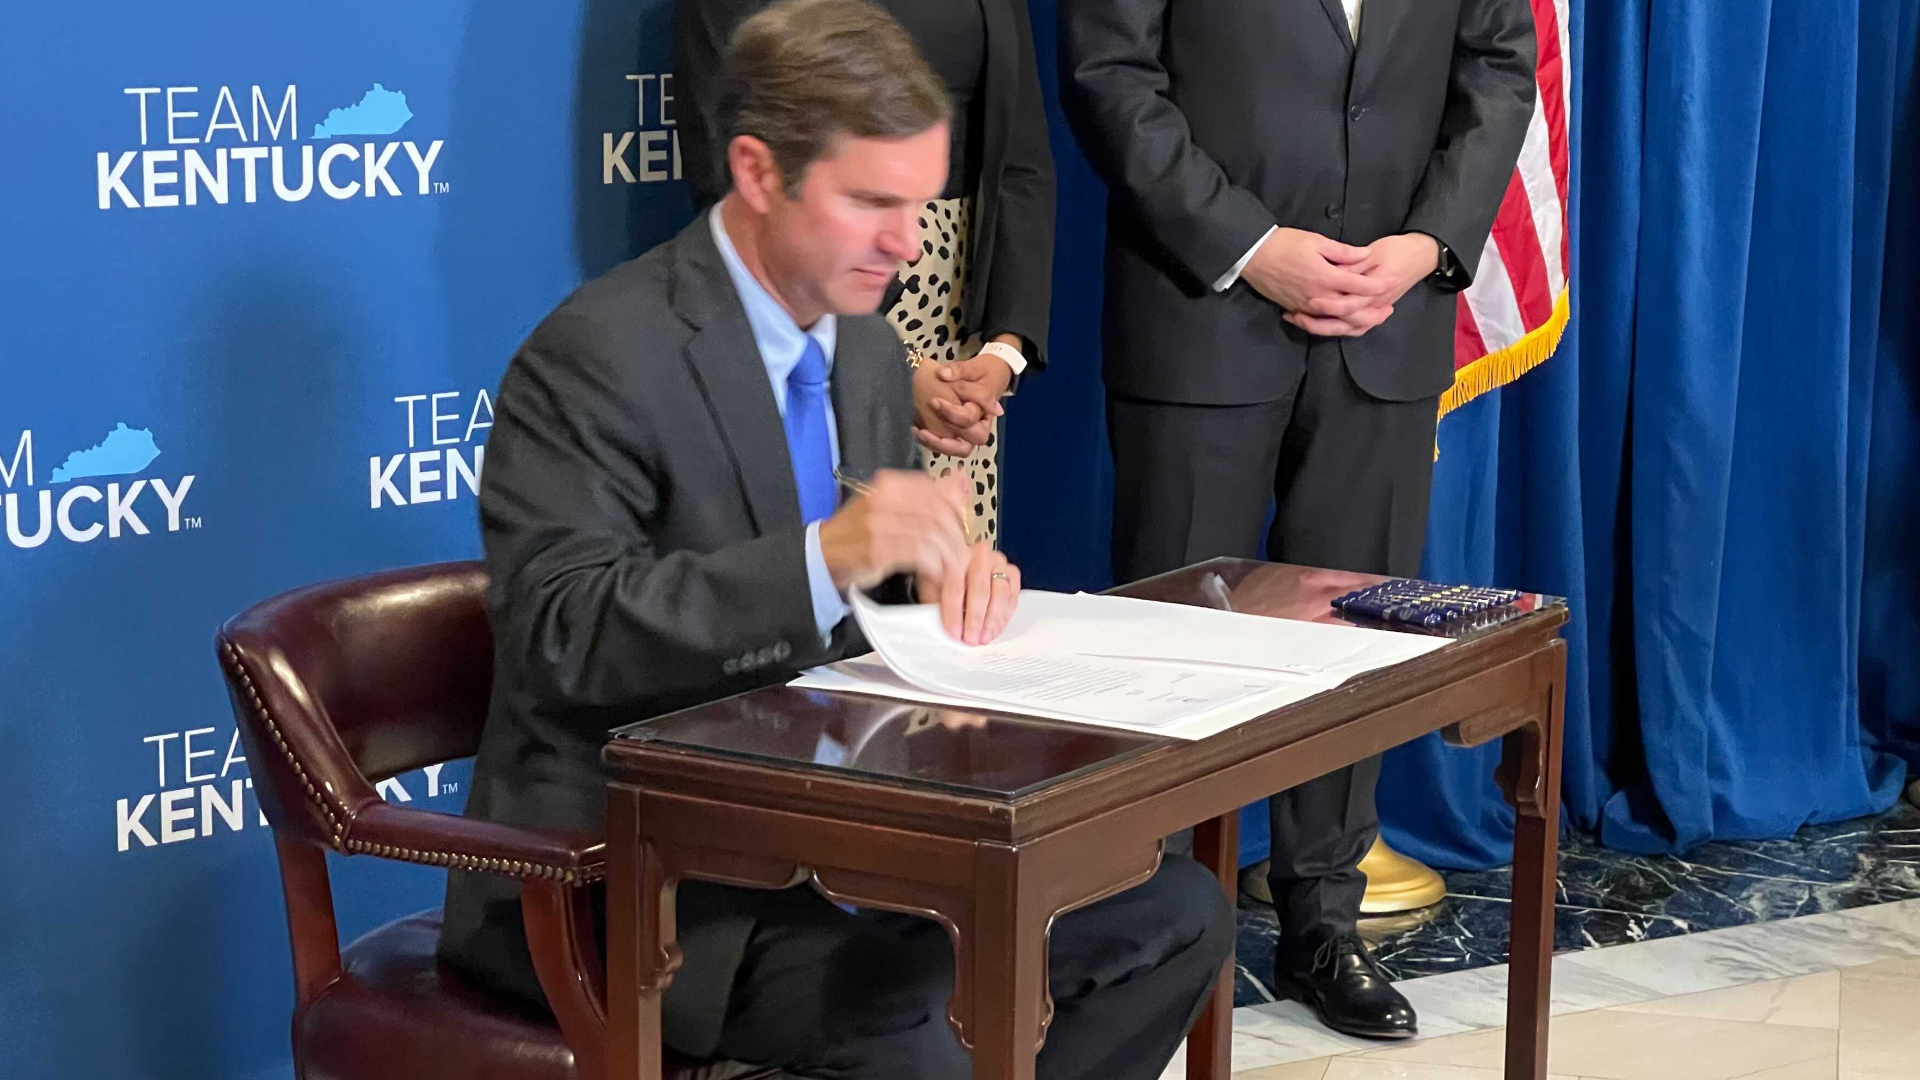 Gov. Andy Beshear signed an executive order officially ending Kentucky's mask mandate and capacity restrictions.